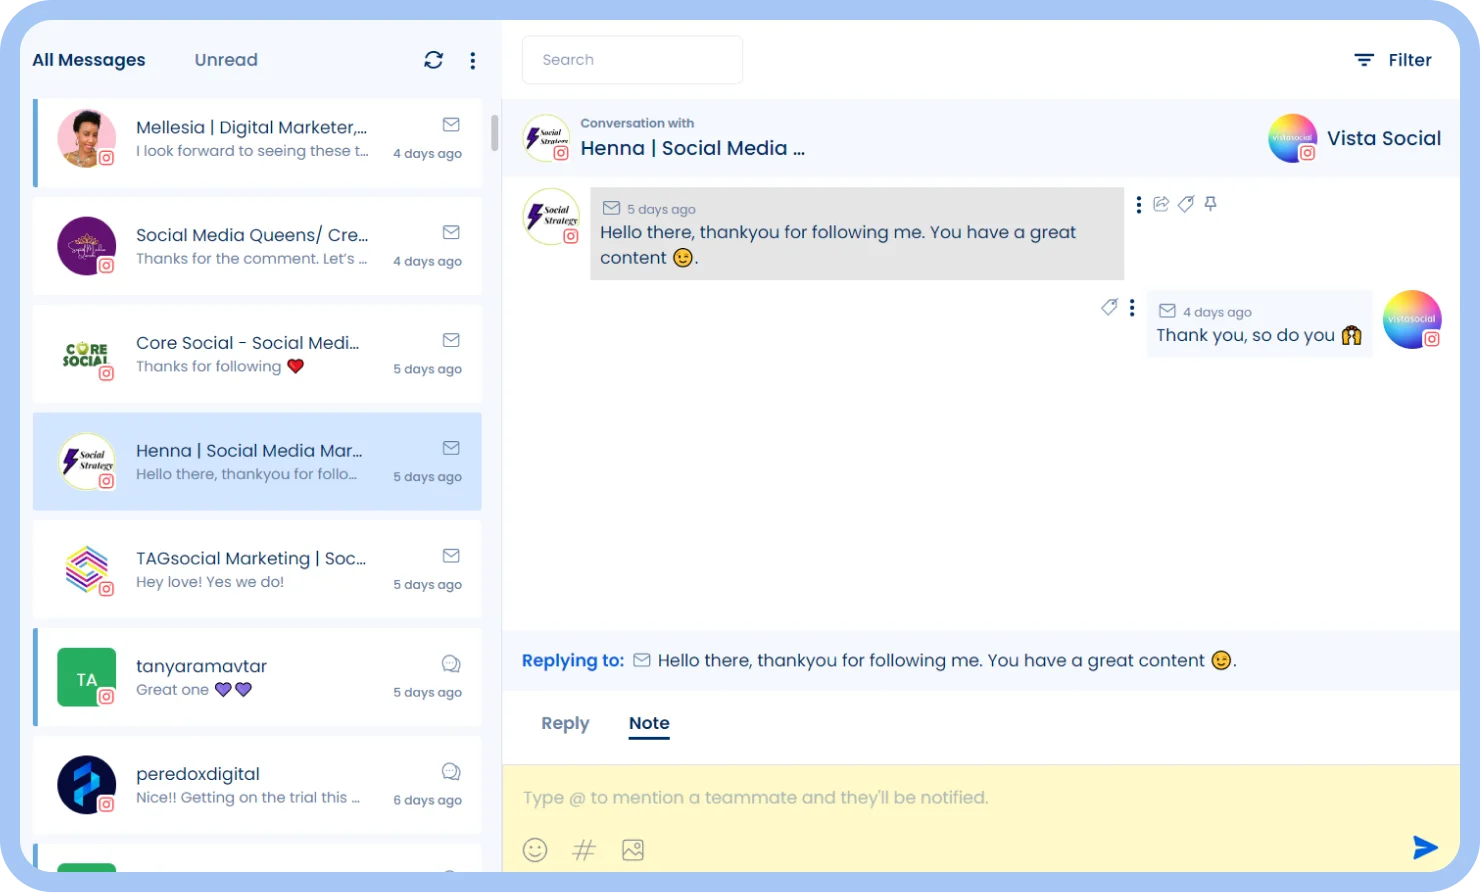 Efficiently Manage Followers & Messages as a Team